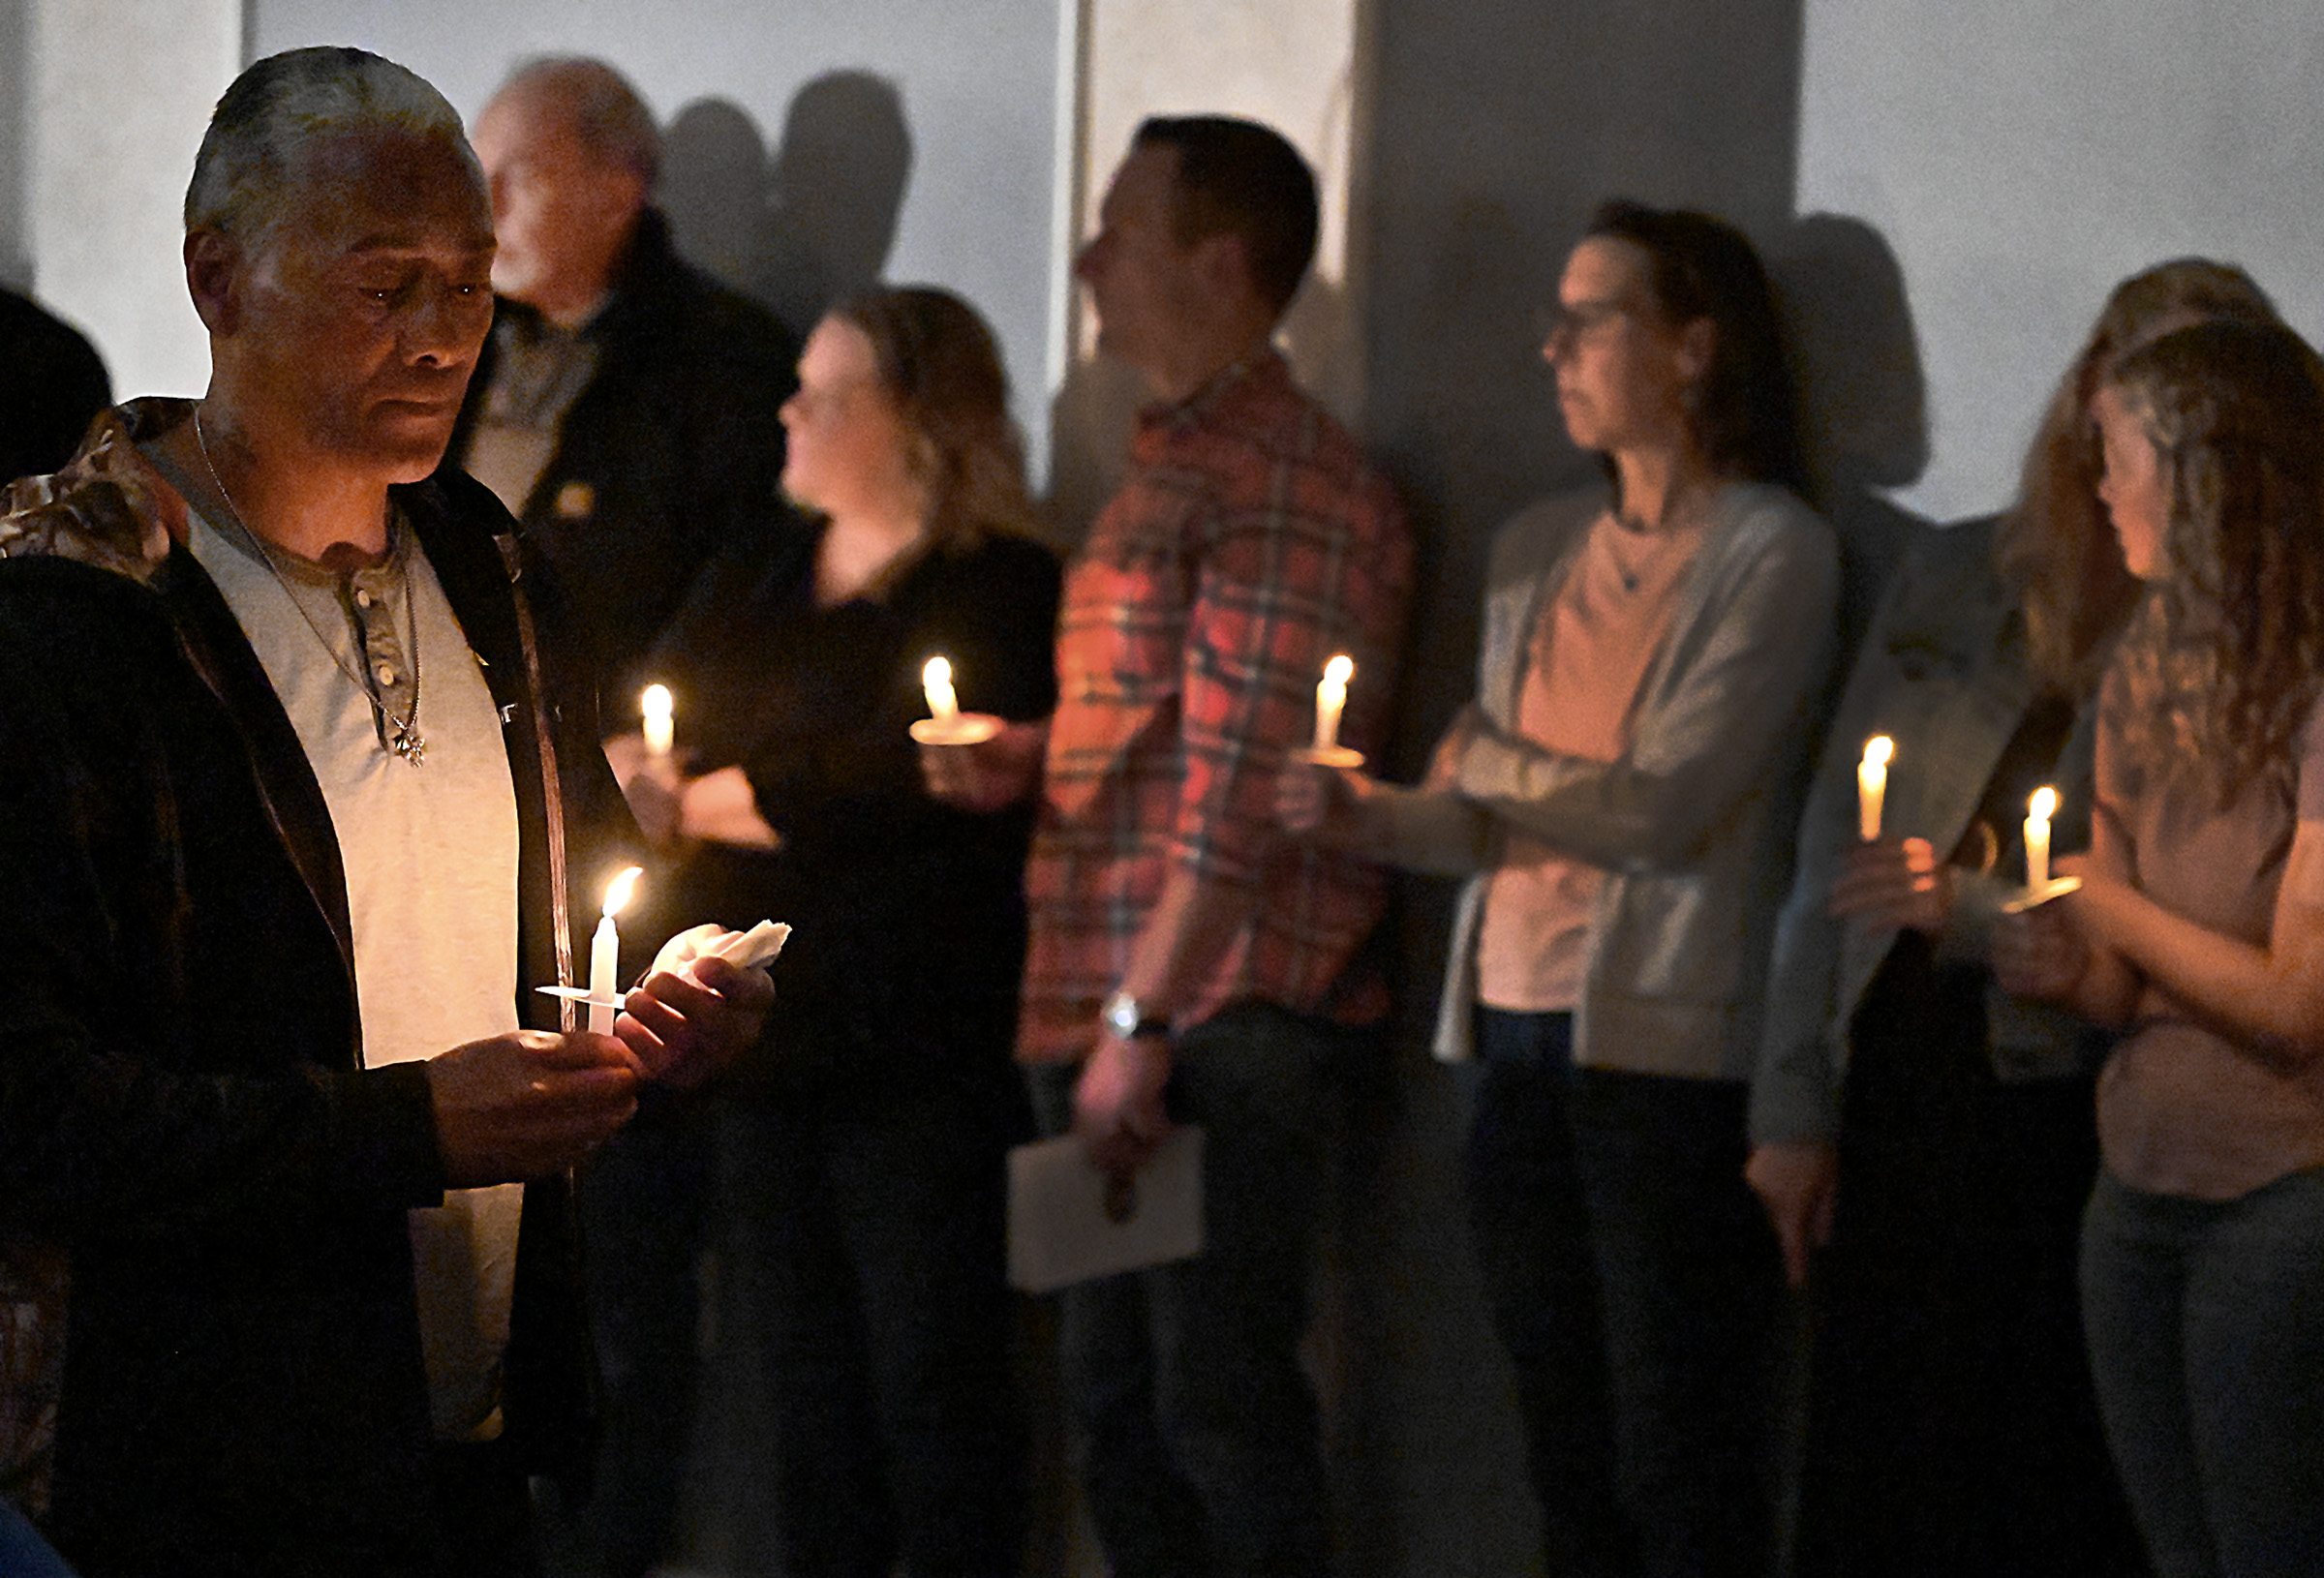 Candles are lit for those remembering friends and loved ones lost to drug overdose at the 9th Annual Drug Overdose and Prevention Vigil Tuesday at Portico at St. John in Westminster. (Jeffrey F. Bill/Staff photo)